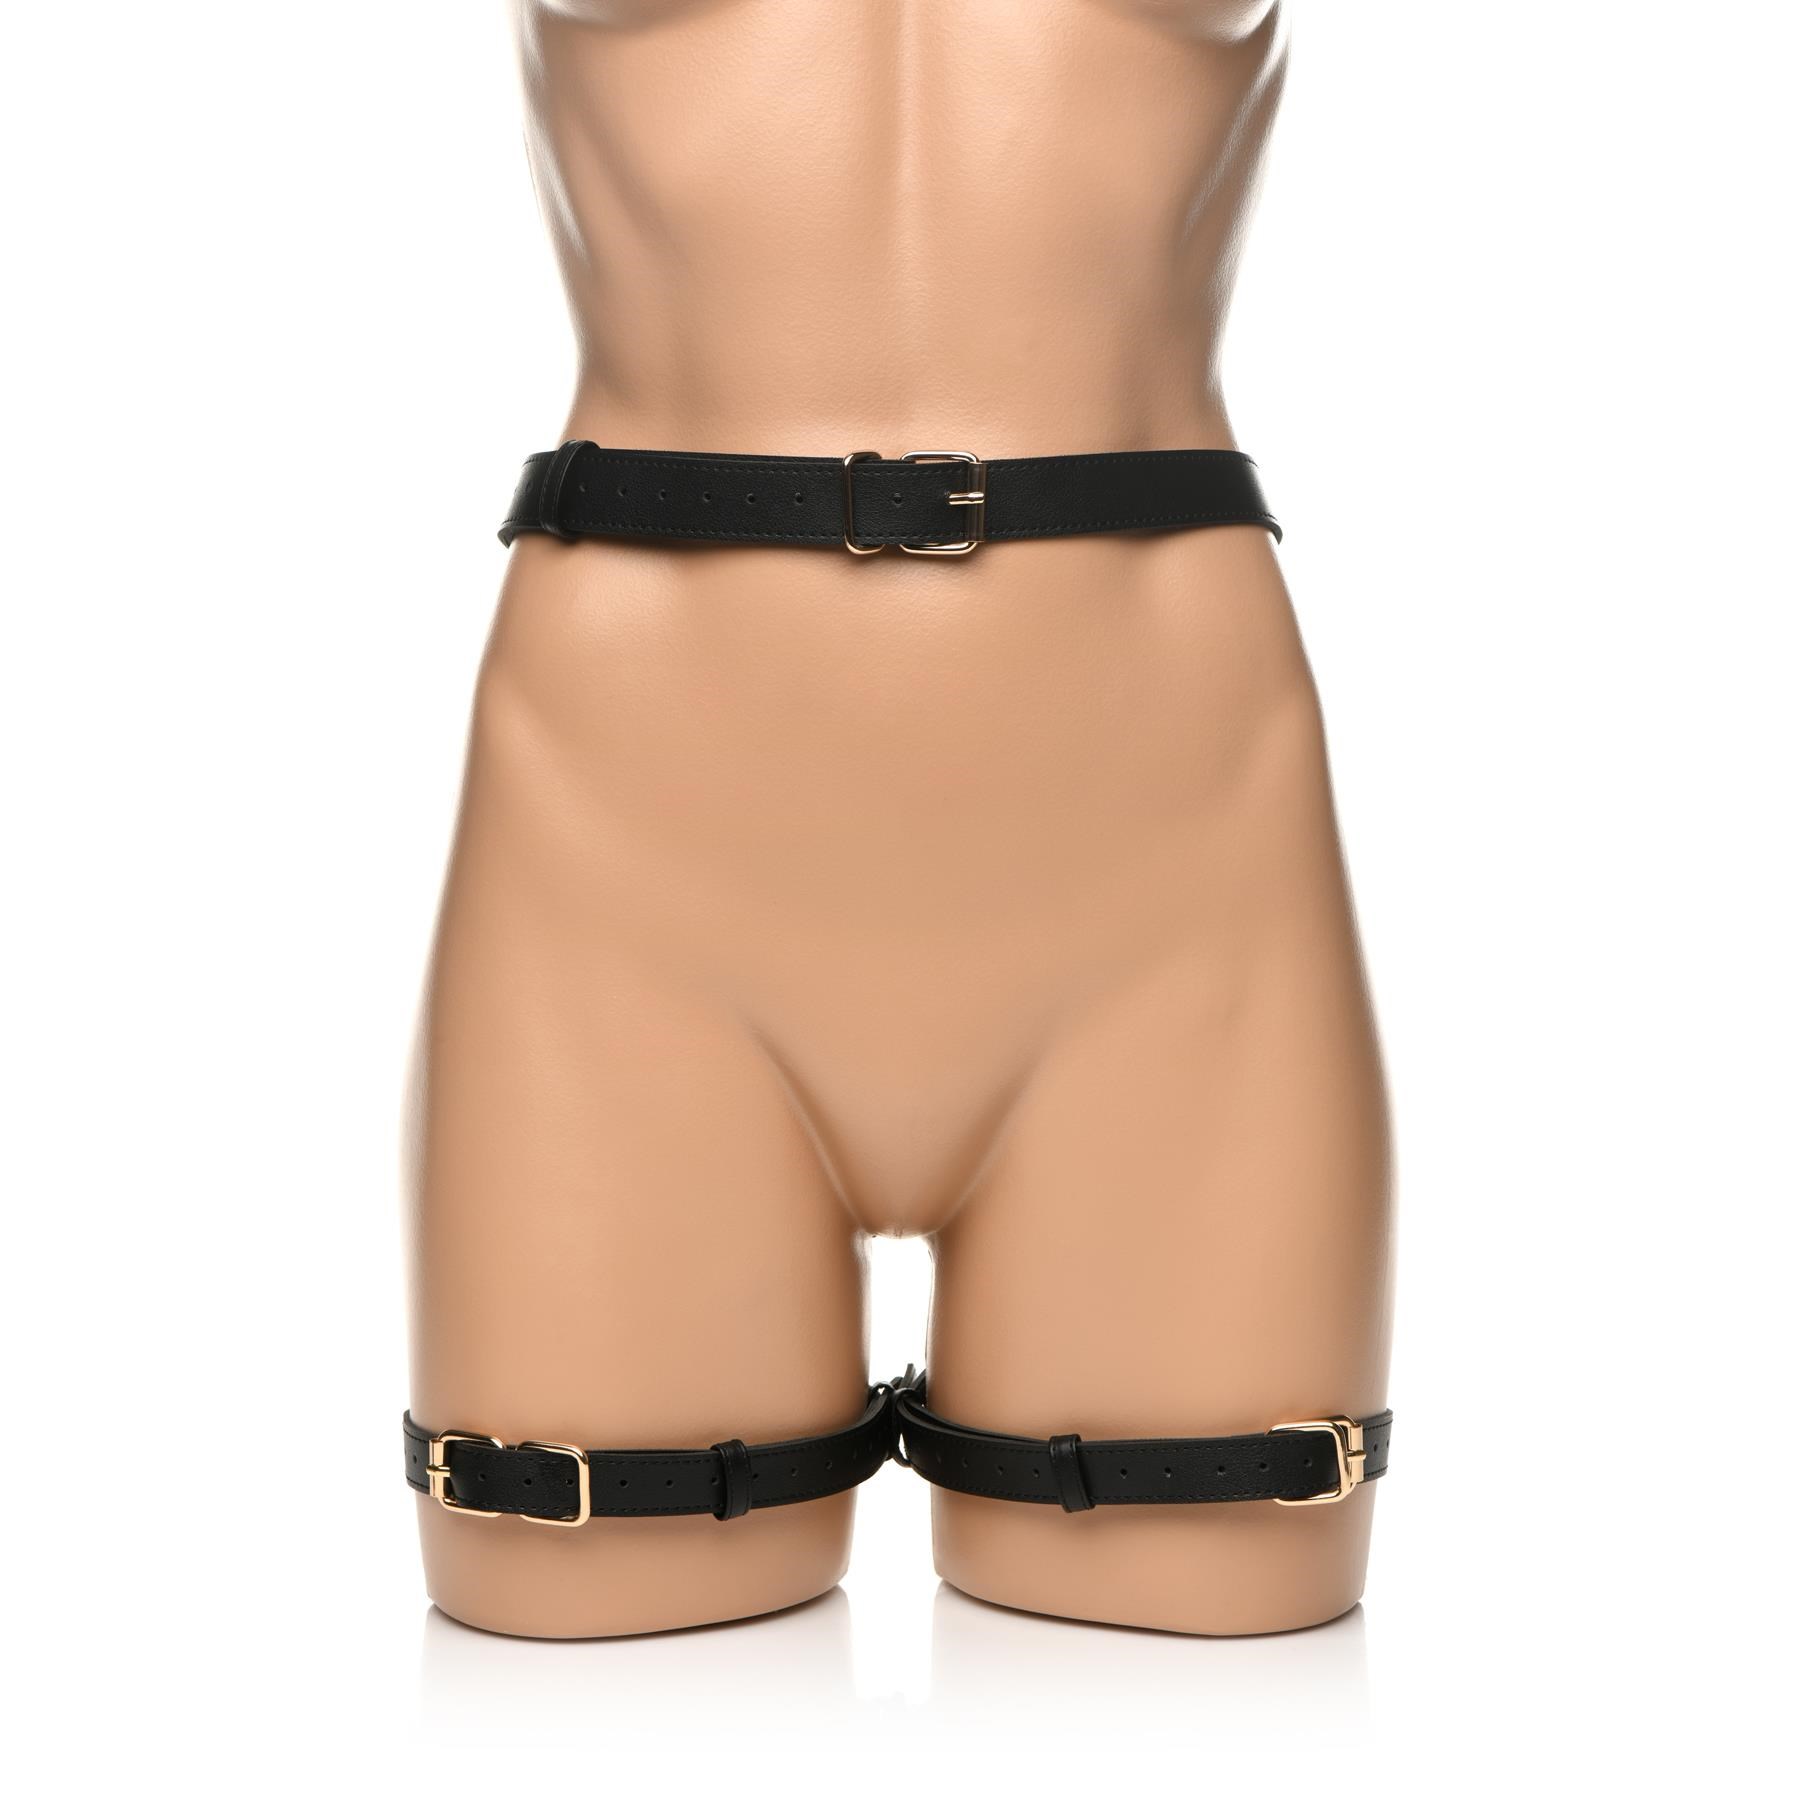 Strict Bondage Harness With Bows - Front Shot